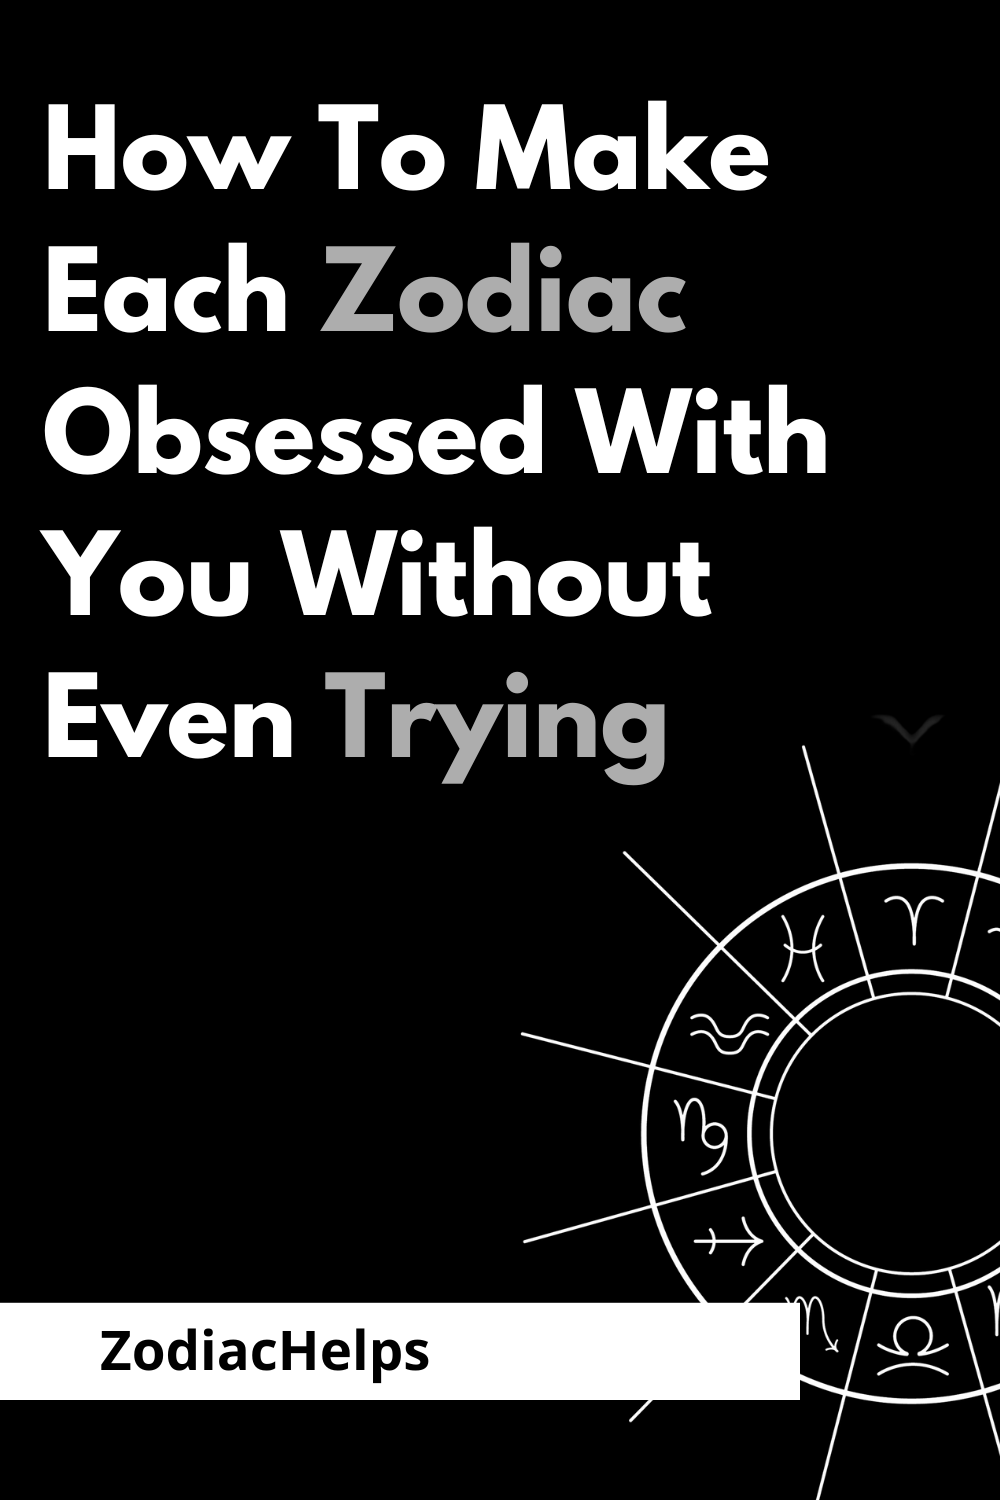 How To Make Each Zodiac Obsessed With You Without Even Trying